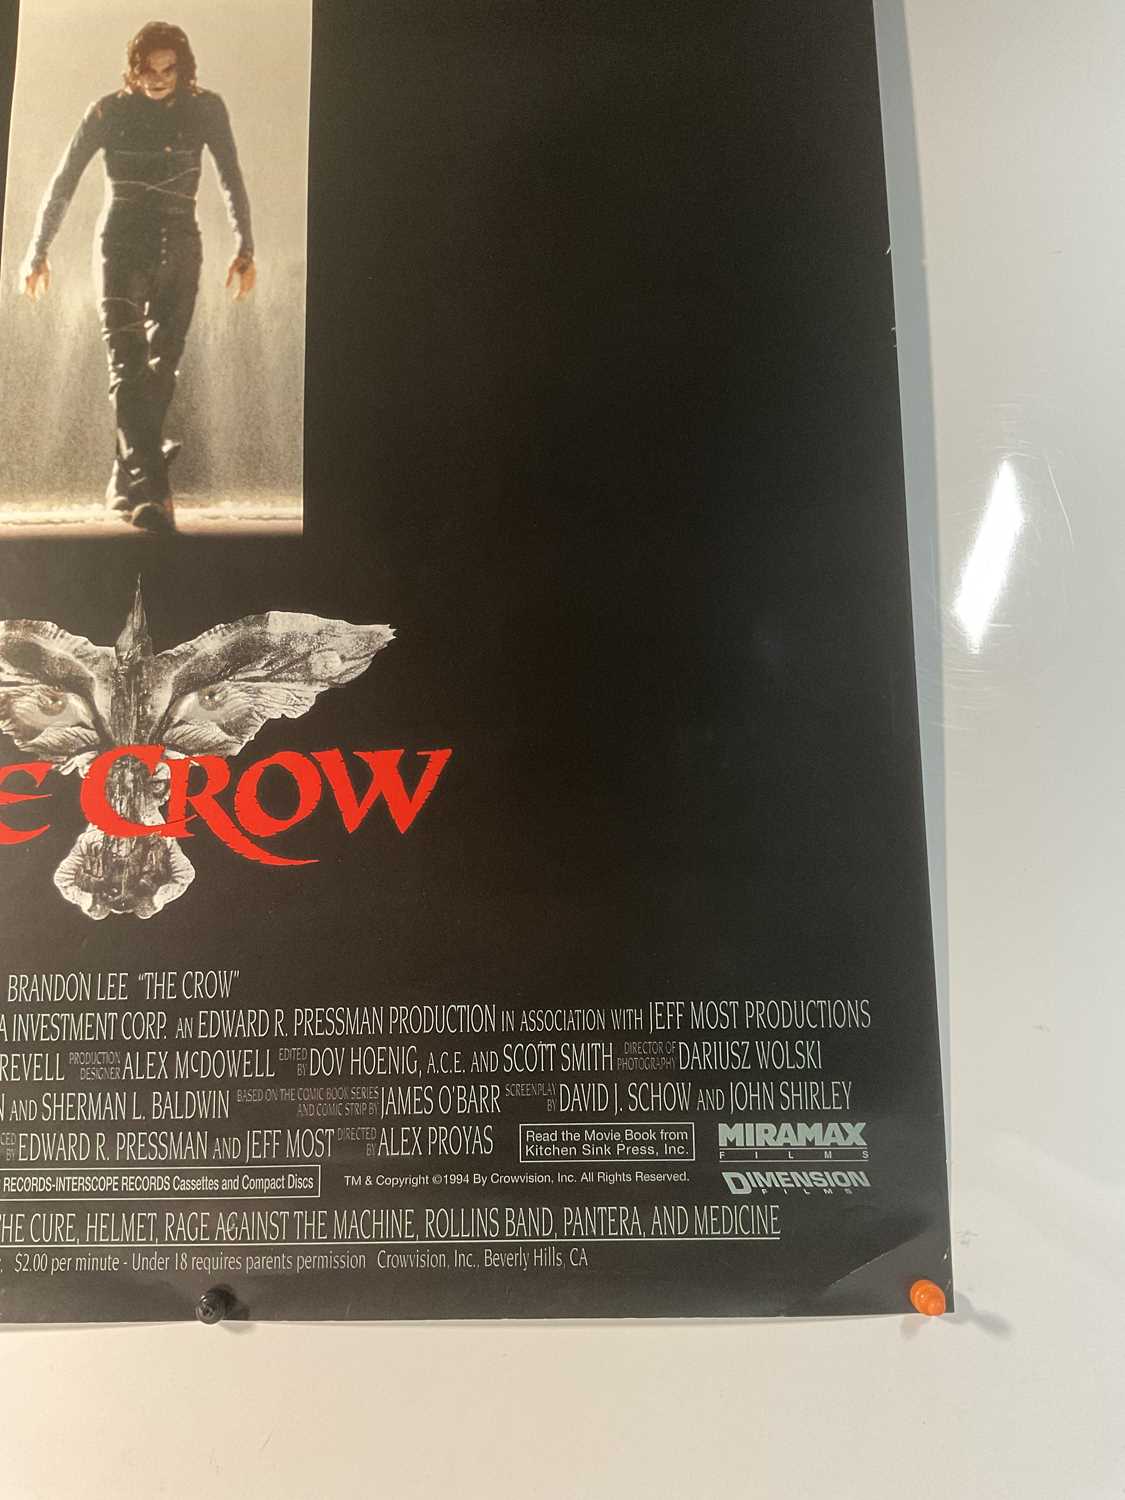 THE CROW (1994) US one-sheet, cult classic starring Brandon Lee in which Lee tragically died - Image 4 of 6